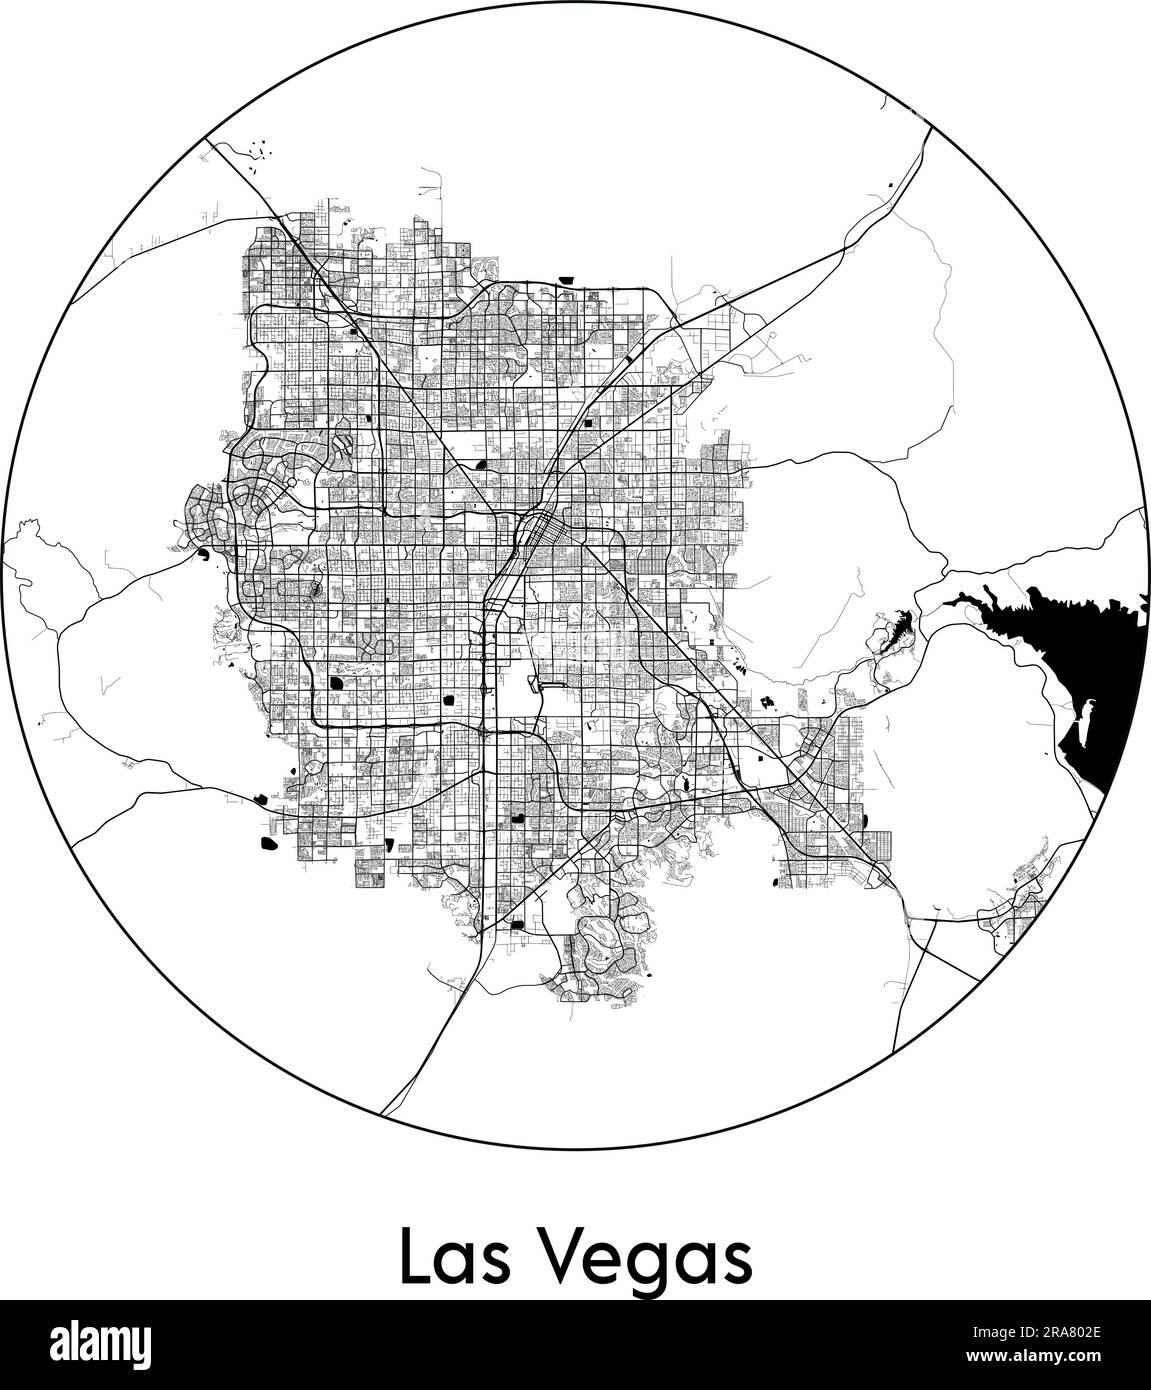 Large Las Vegas strip map with monorail - 2012, Las Vegas, Nevada state, USA, Maps of the USA